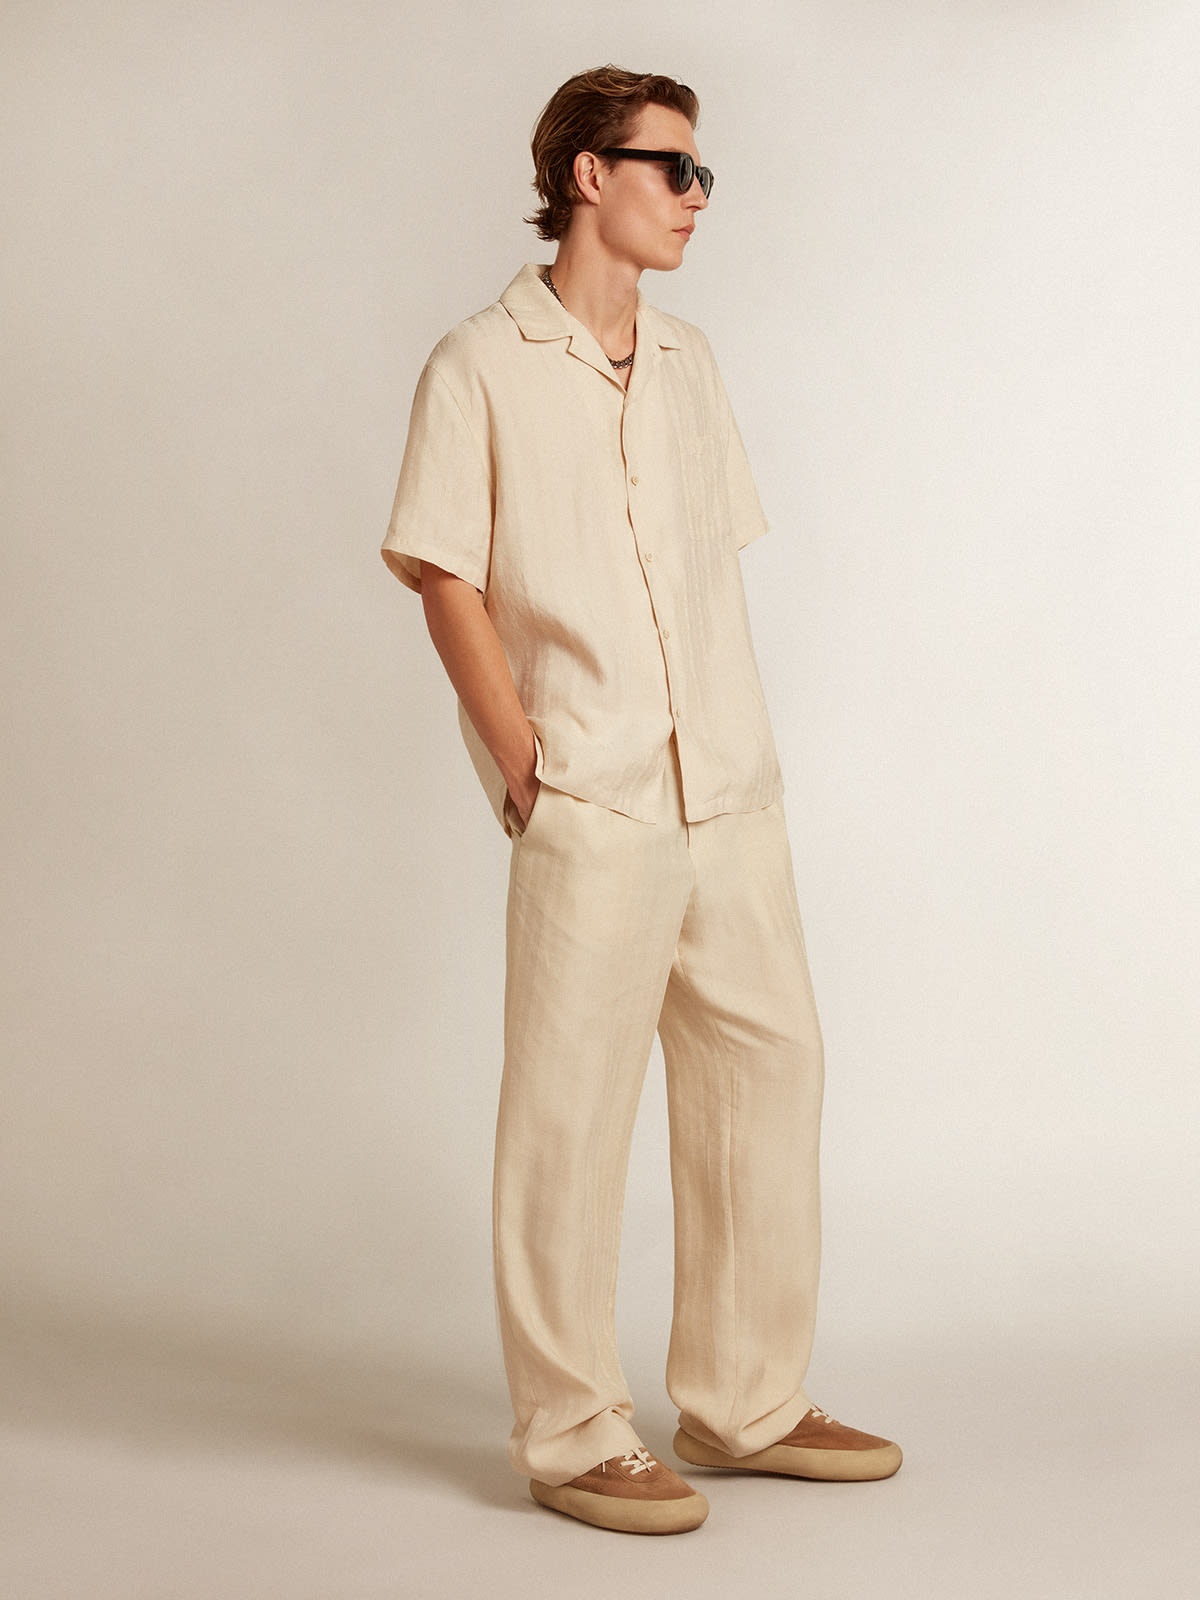 Short-sleeved shirt in parchment-colored linen - 3